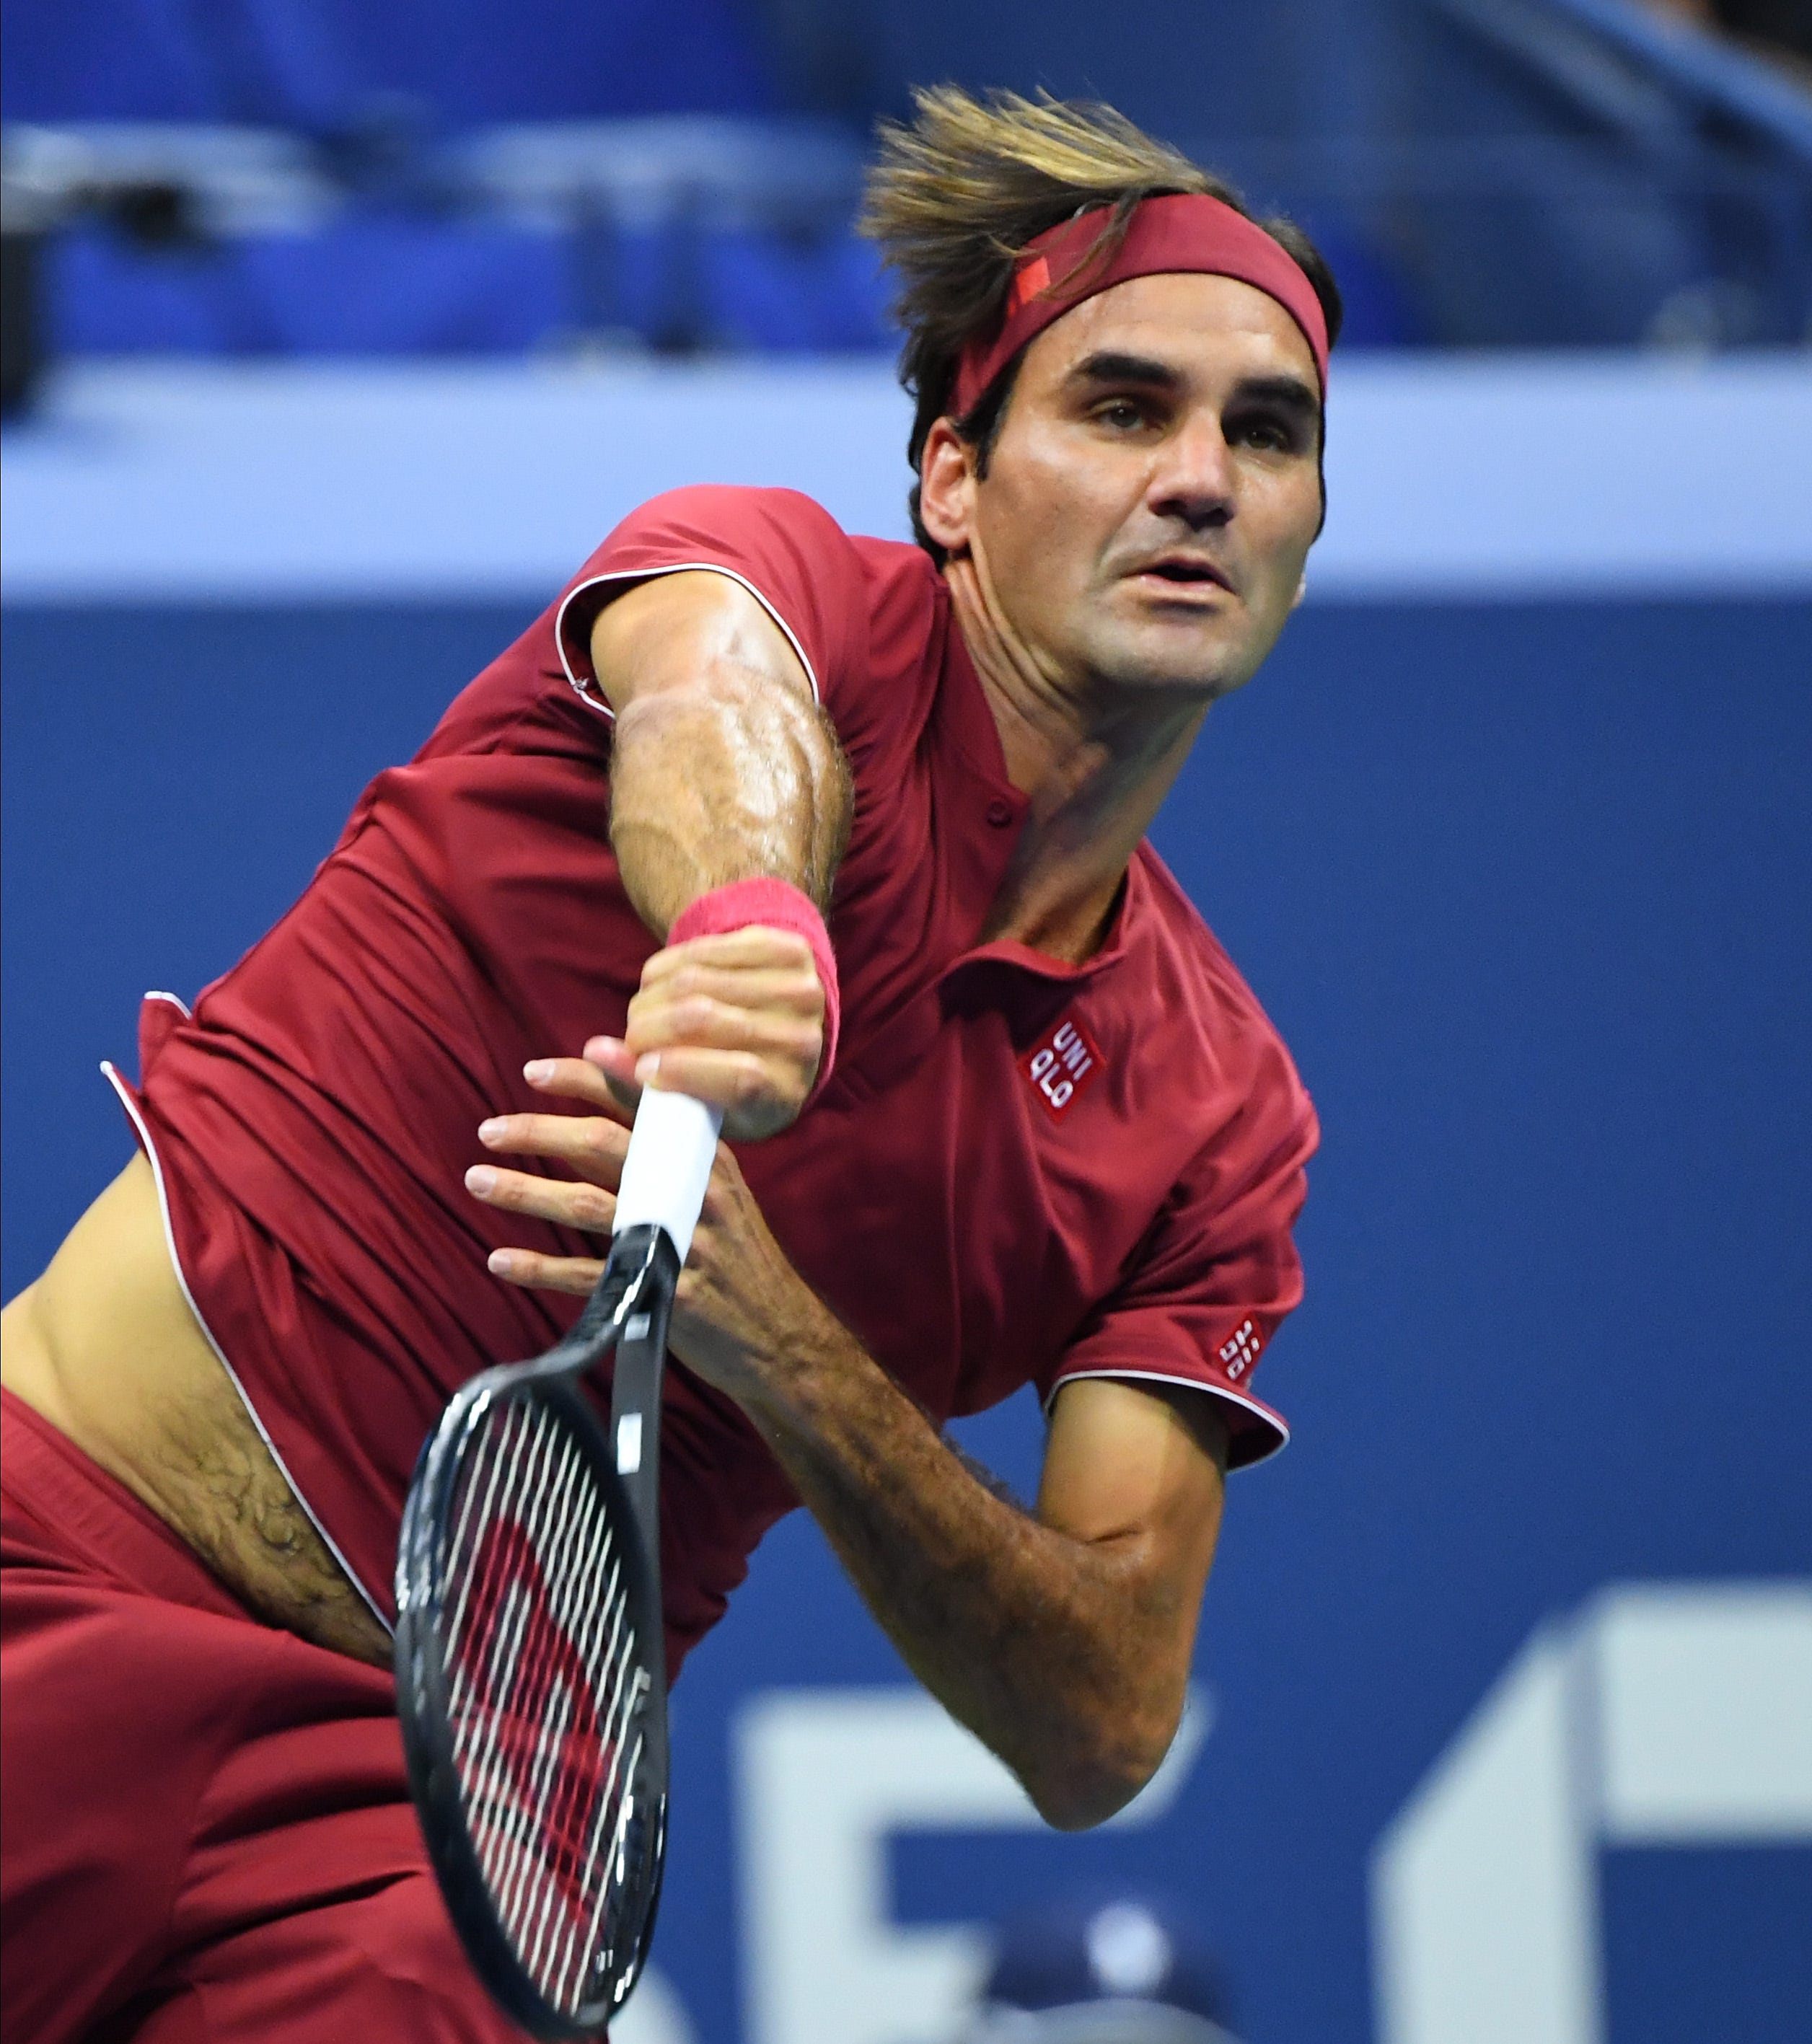 Roger Federer happy to be healthy, back at US Open and into Round 2 | Featured News ...